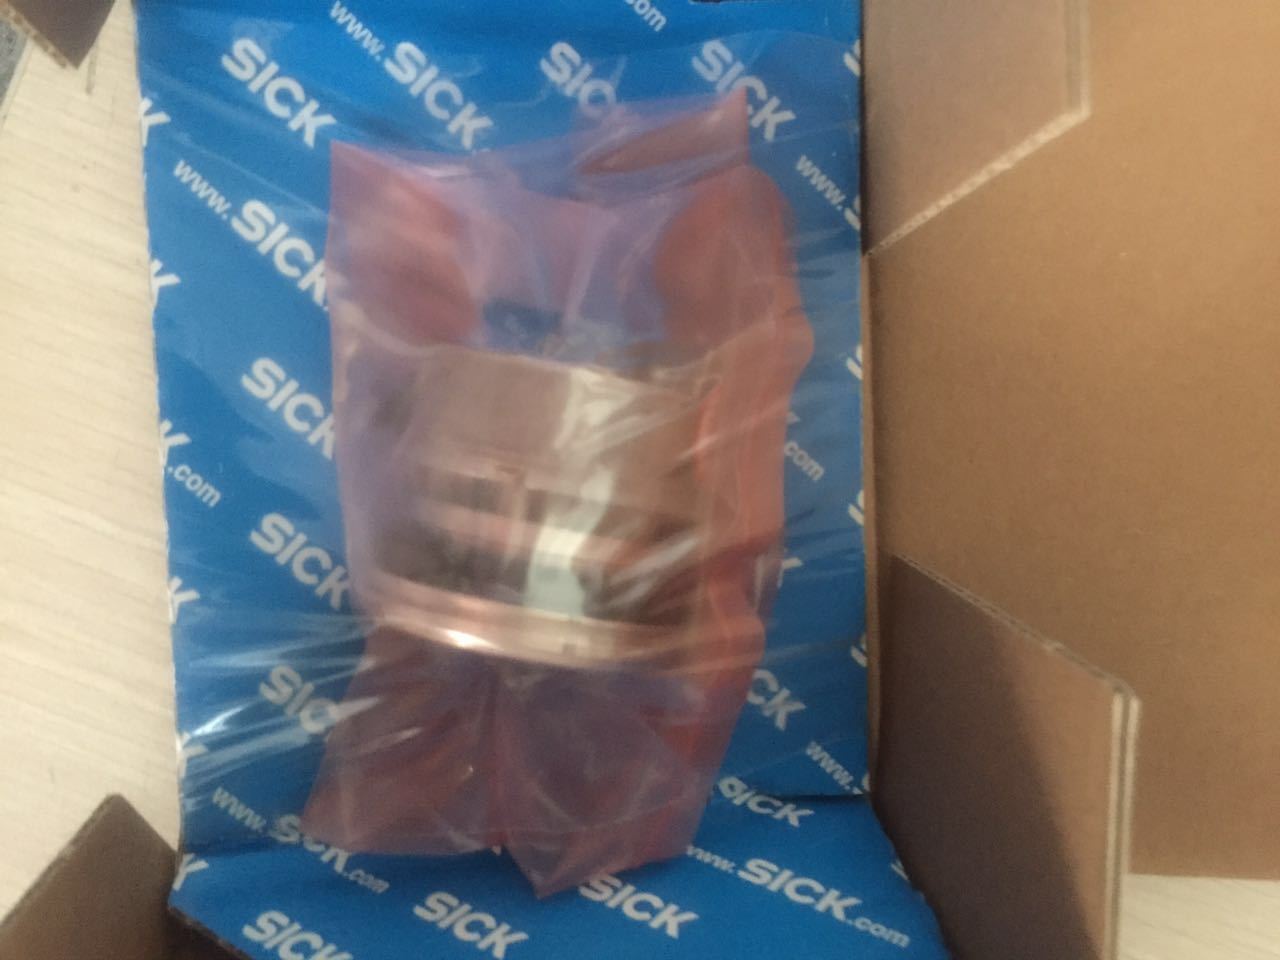 1PC Sick Encoders SRS50-HZA0-S21 New In Box SRS50HZA0S21 Shpping